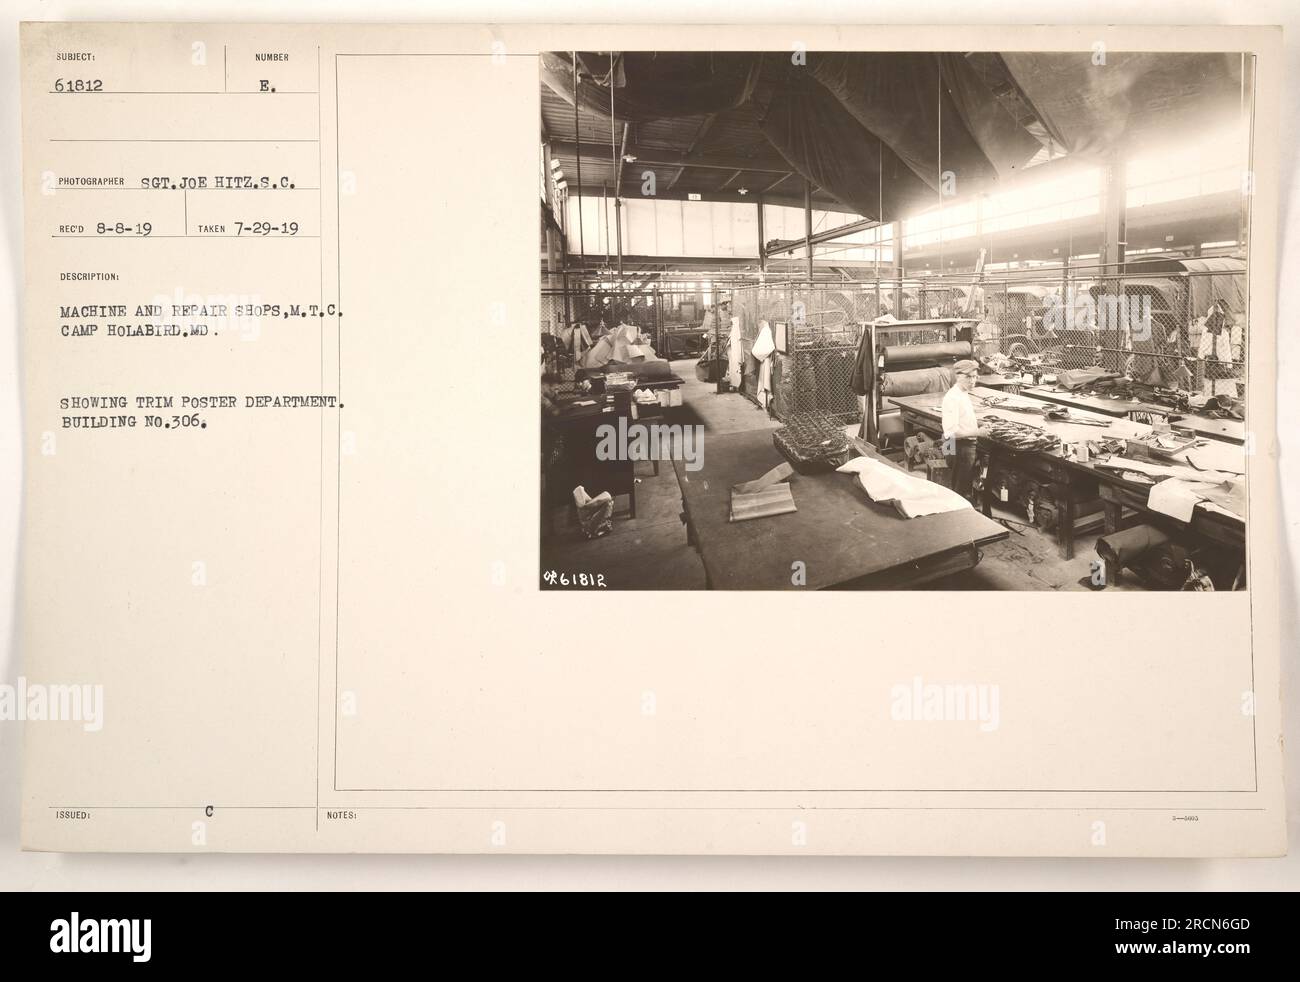 Interior of Repair and Machine Shops at Camp Holabird, MD, showing the trim poster department in Building No. 306. This photograph was taken on July 29, 1919, by Sergeant Joseph Hitz, Signal Corps photographer. Description number B, issued for military activities documentation. Stock Photo